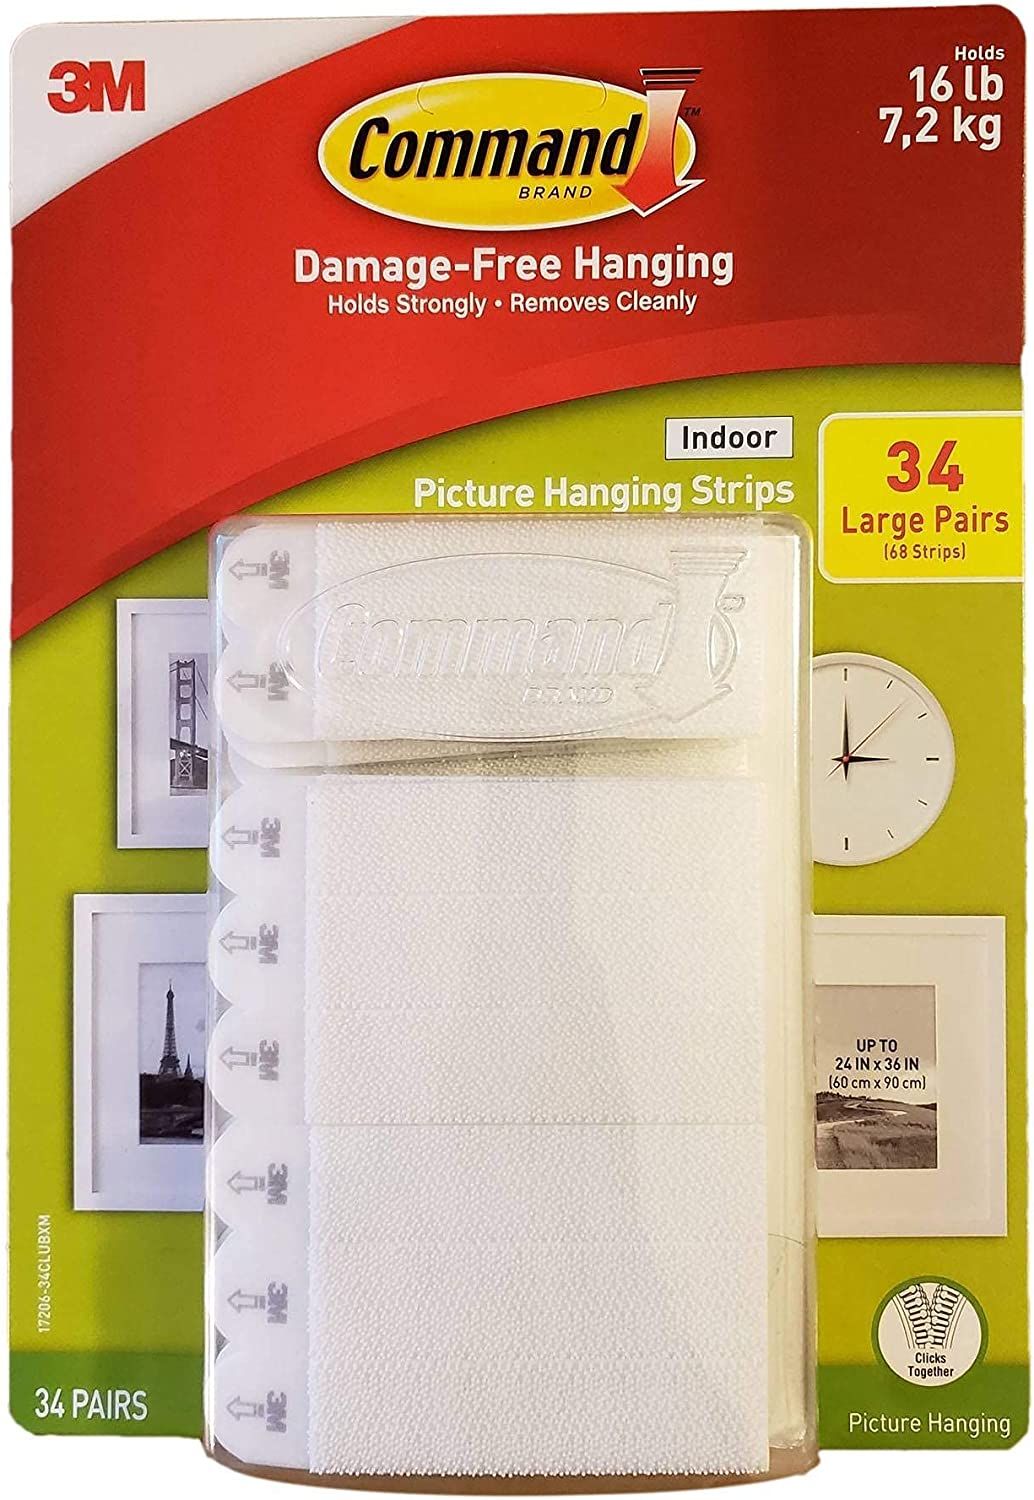 Command Indoor Picture Hanging Strips 34 Large Pairs 68 Strips | Amazon (US)